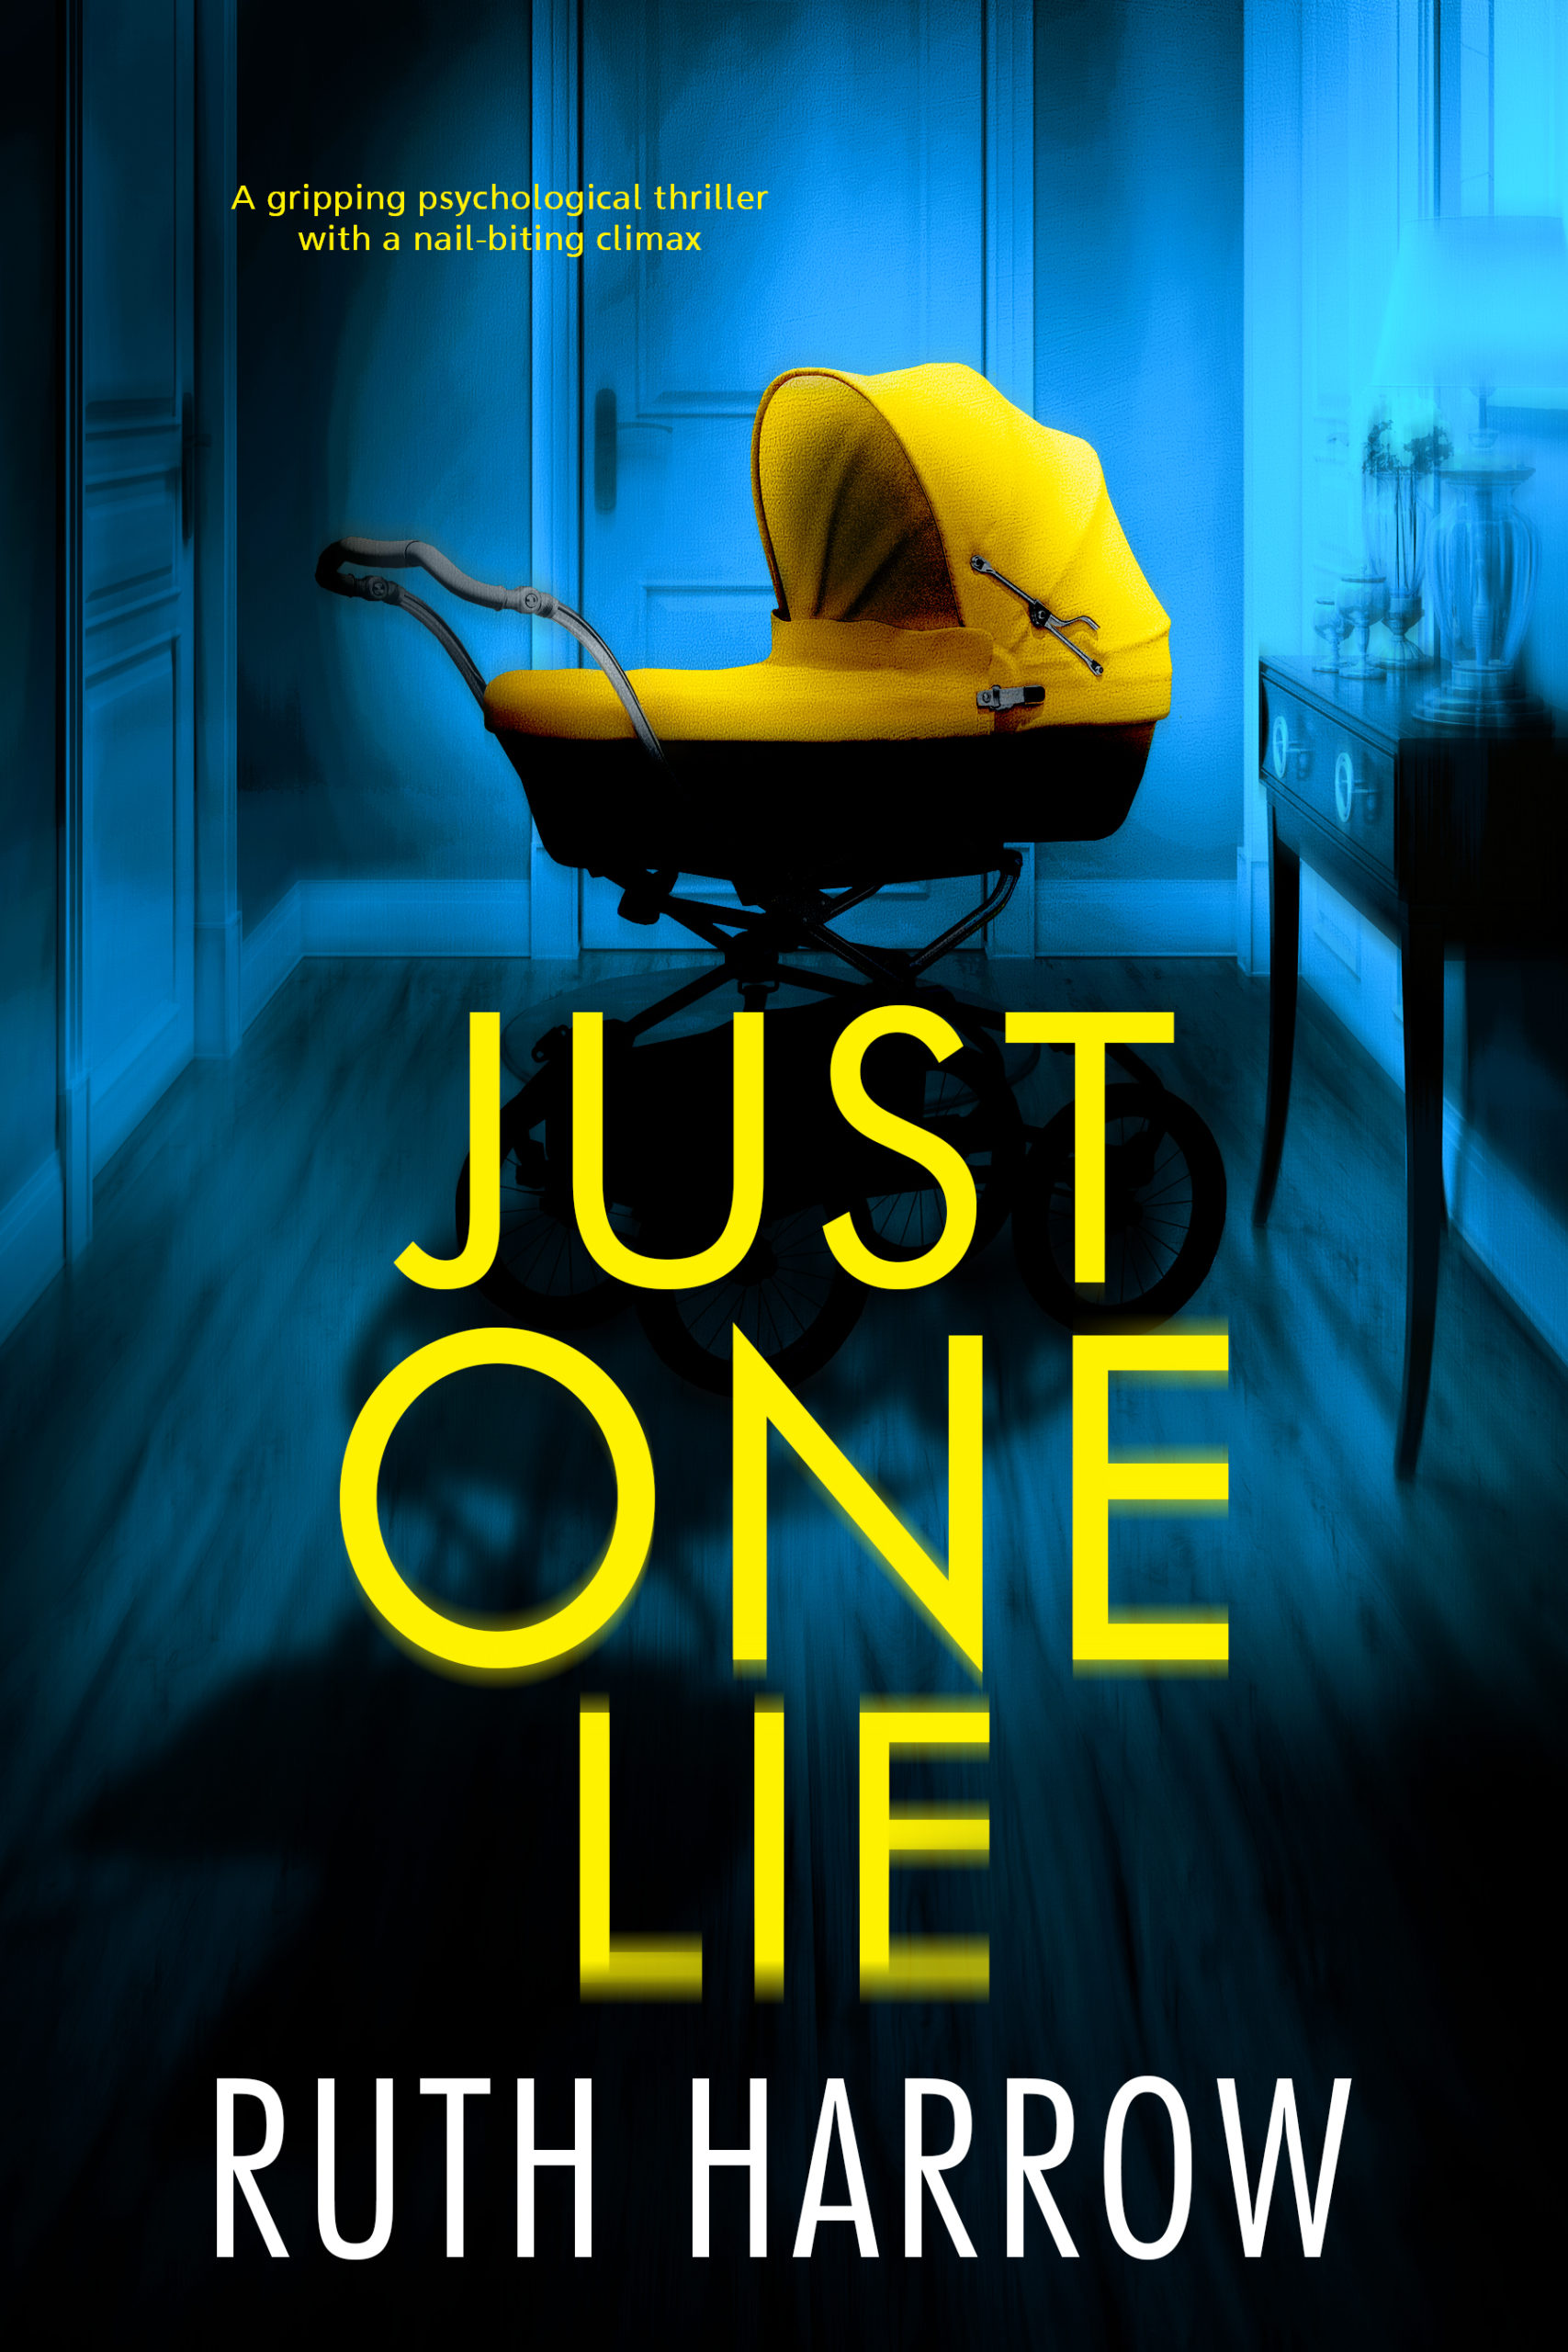 RUTH HARROW NEW RELEASE – JUST ONE LIE